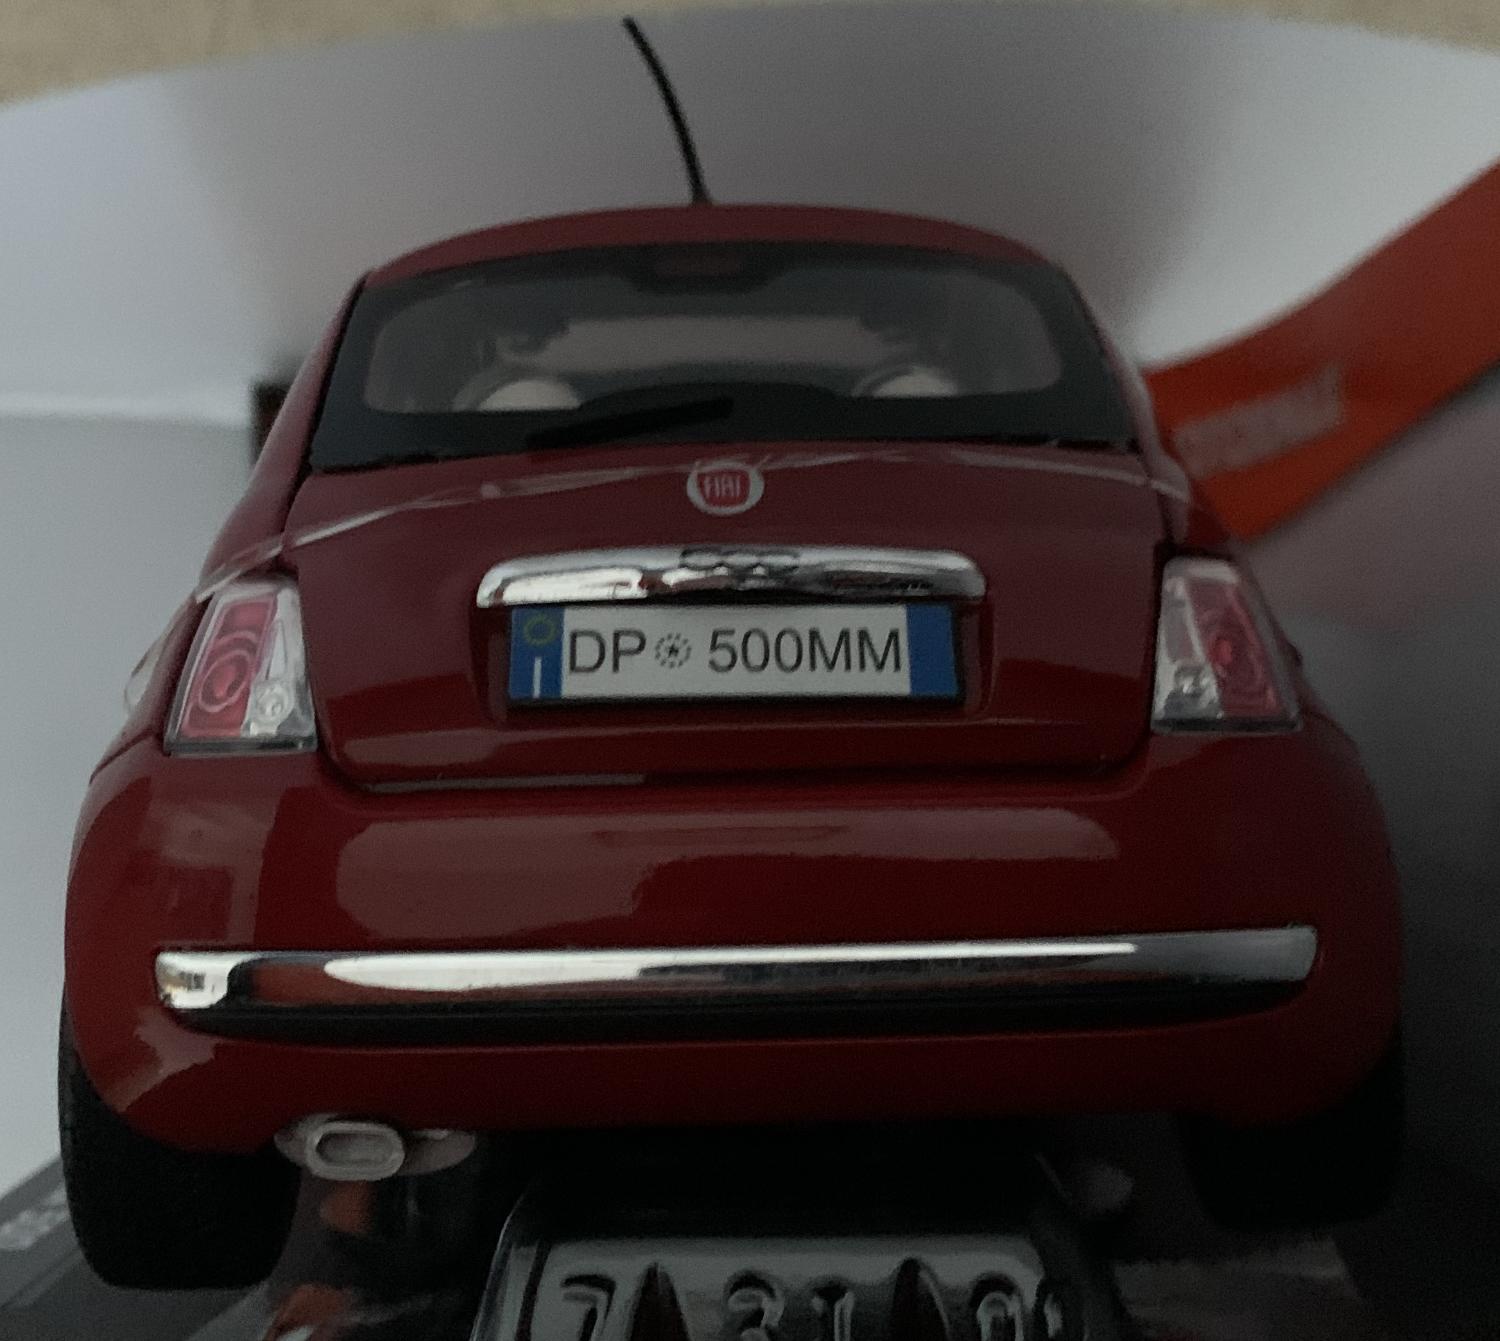 very good representation of the Fiat Nuova 500 decorated in red with silver wheel.